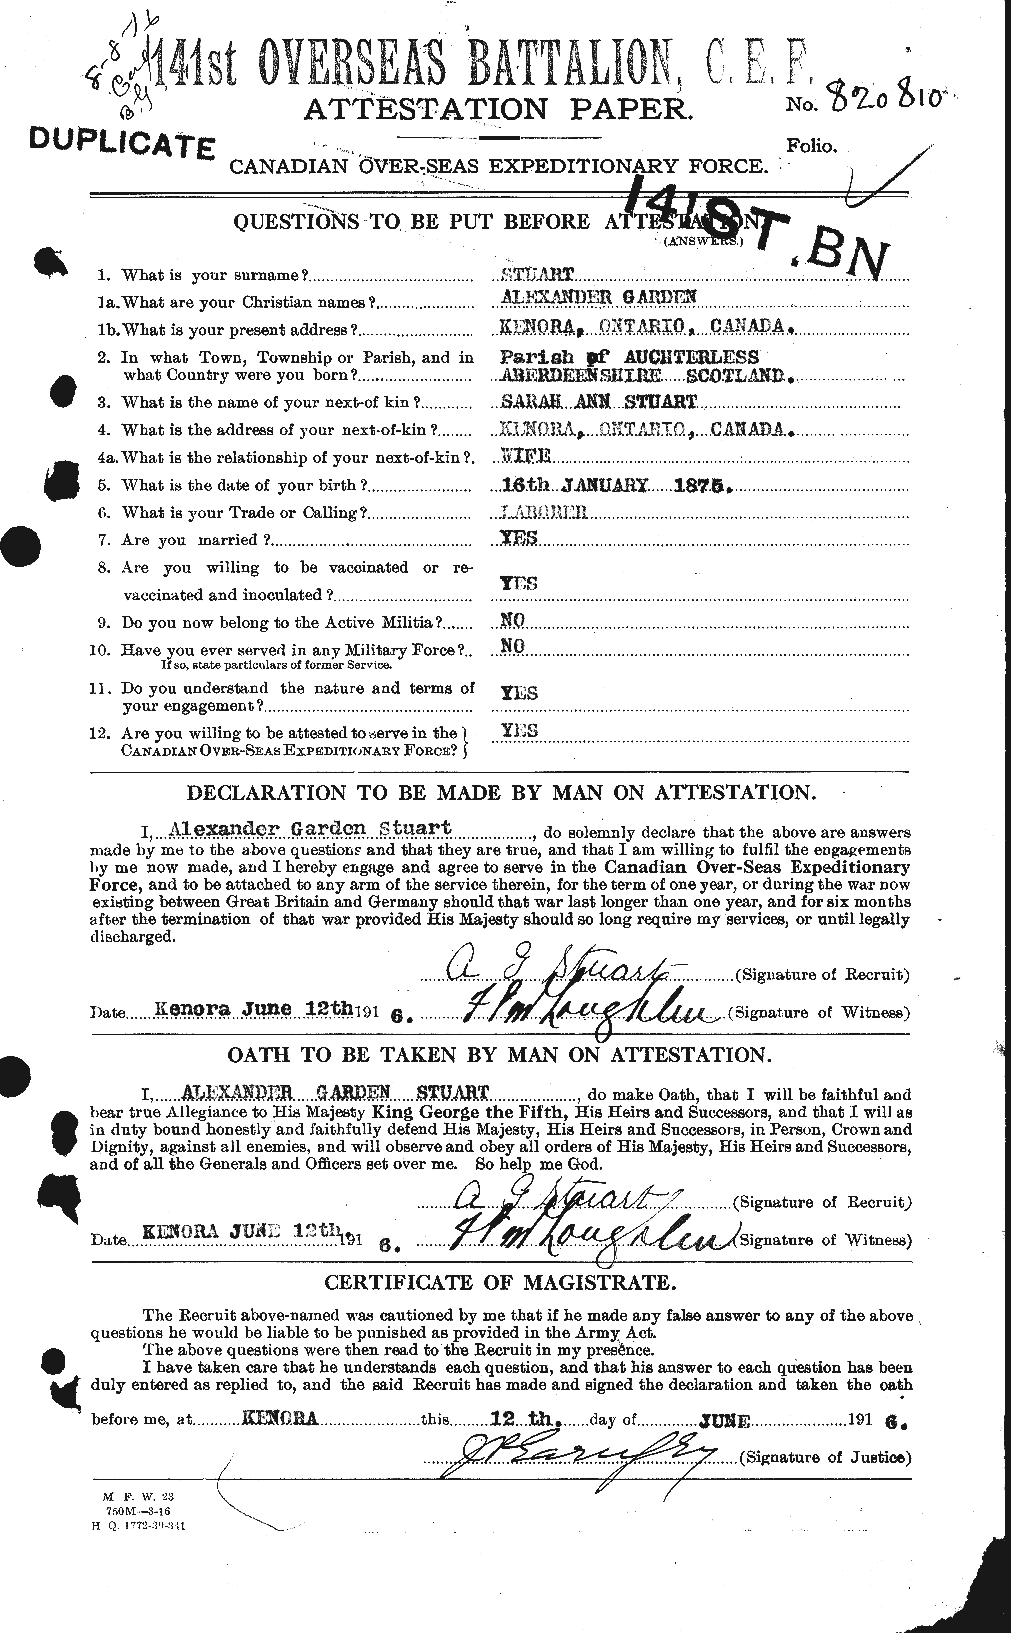 Personnel Records of the First World War - CEF 122328a